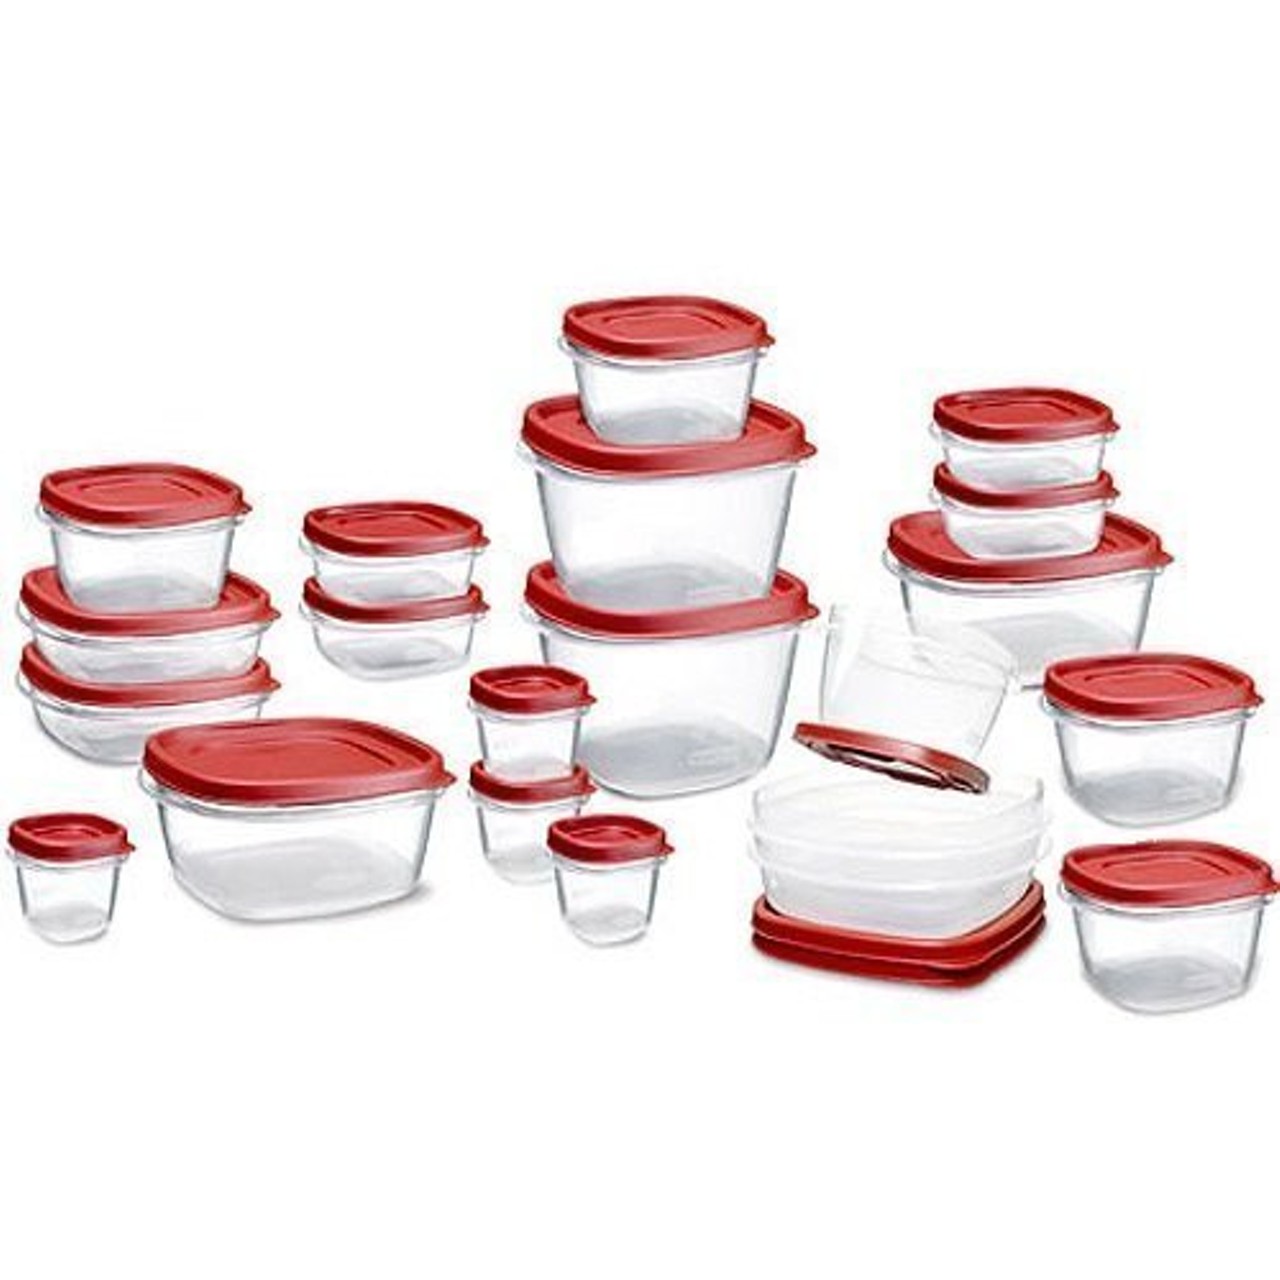  42-piece Rubbermaid Food Storage Containers. $15.99 (25 % off)
SO MUCH FOOD PREP CAN HAPPEN NOW.